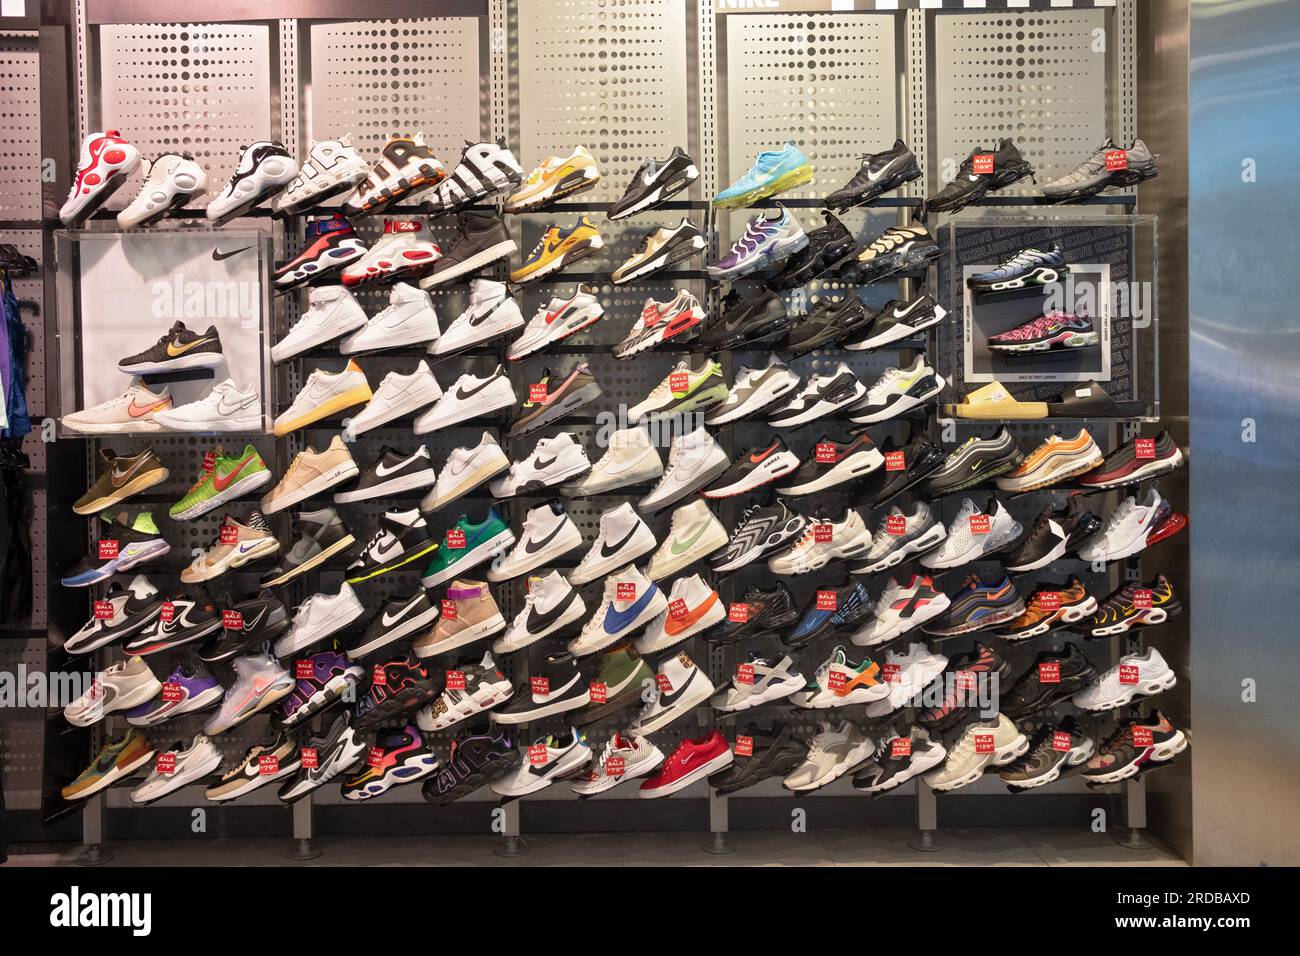 A colorful display of NIKE shoes at Dick's Sporting Goods in the Danbury Fair Mall in Connecticut. Stock Photo